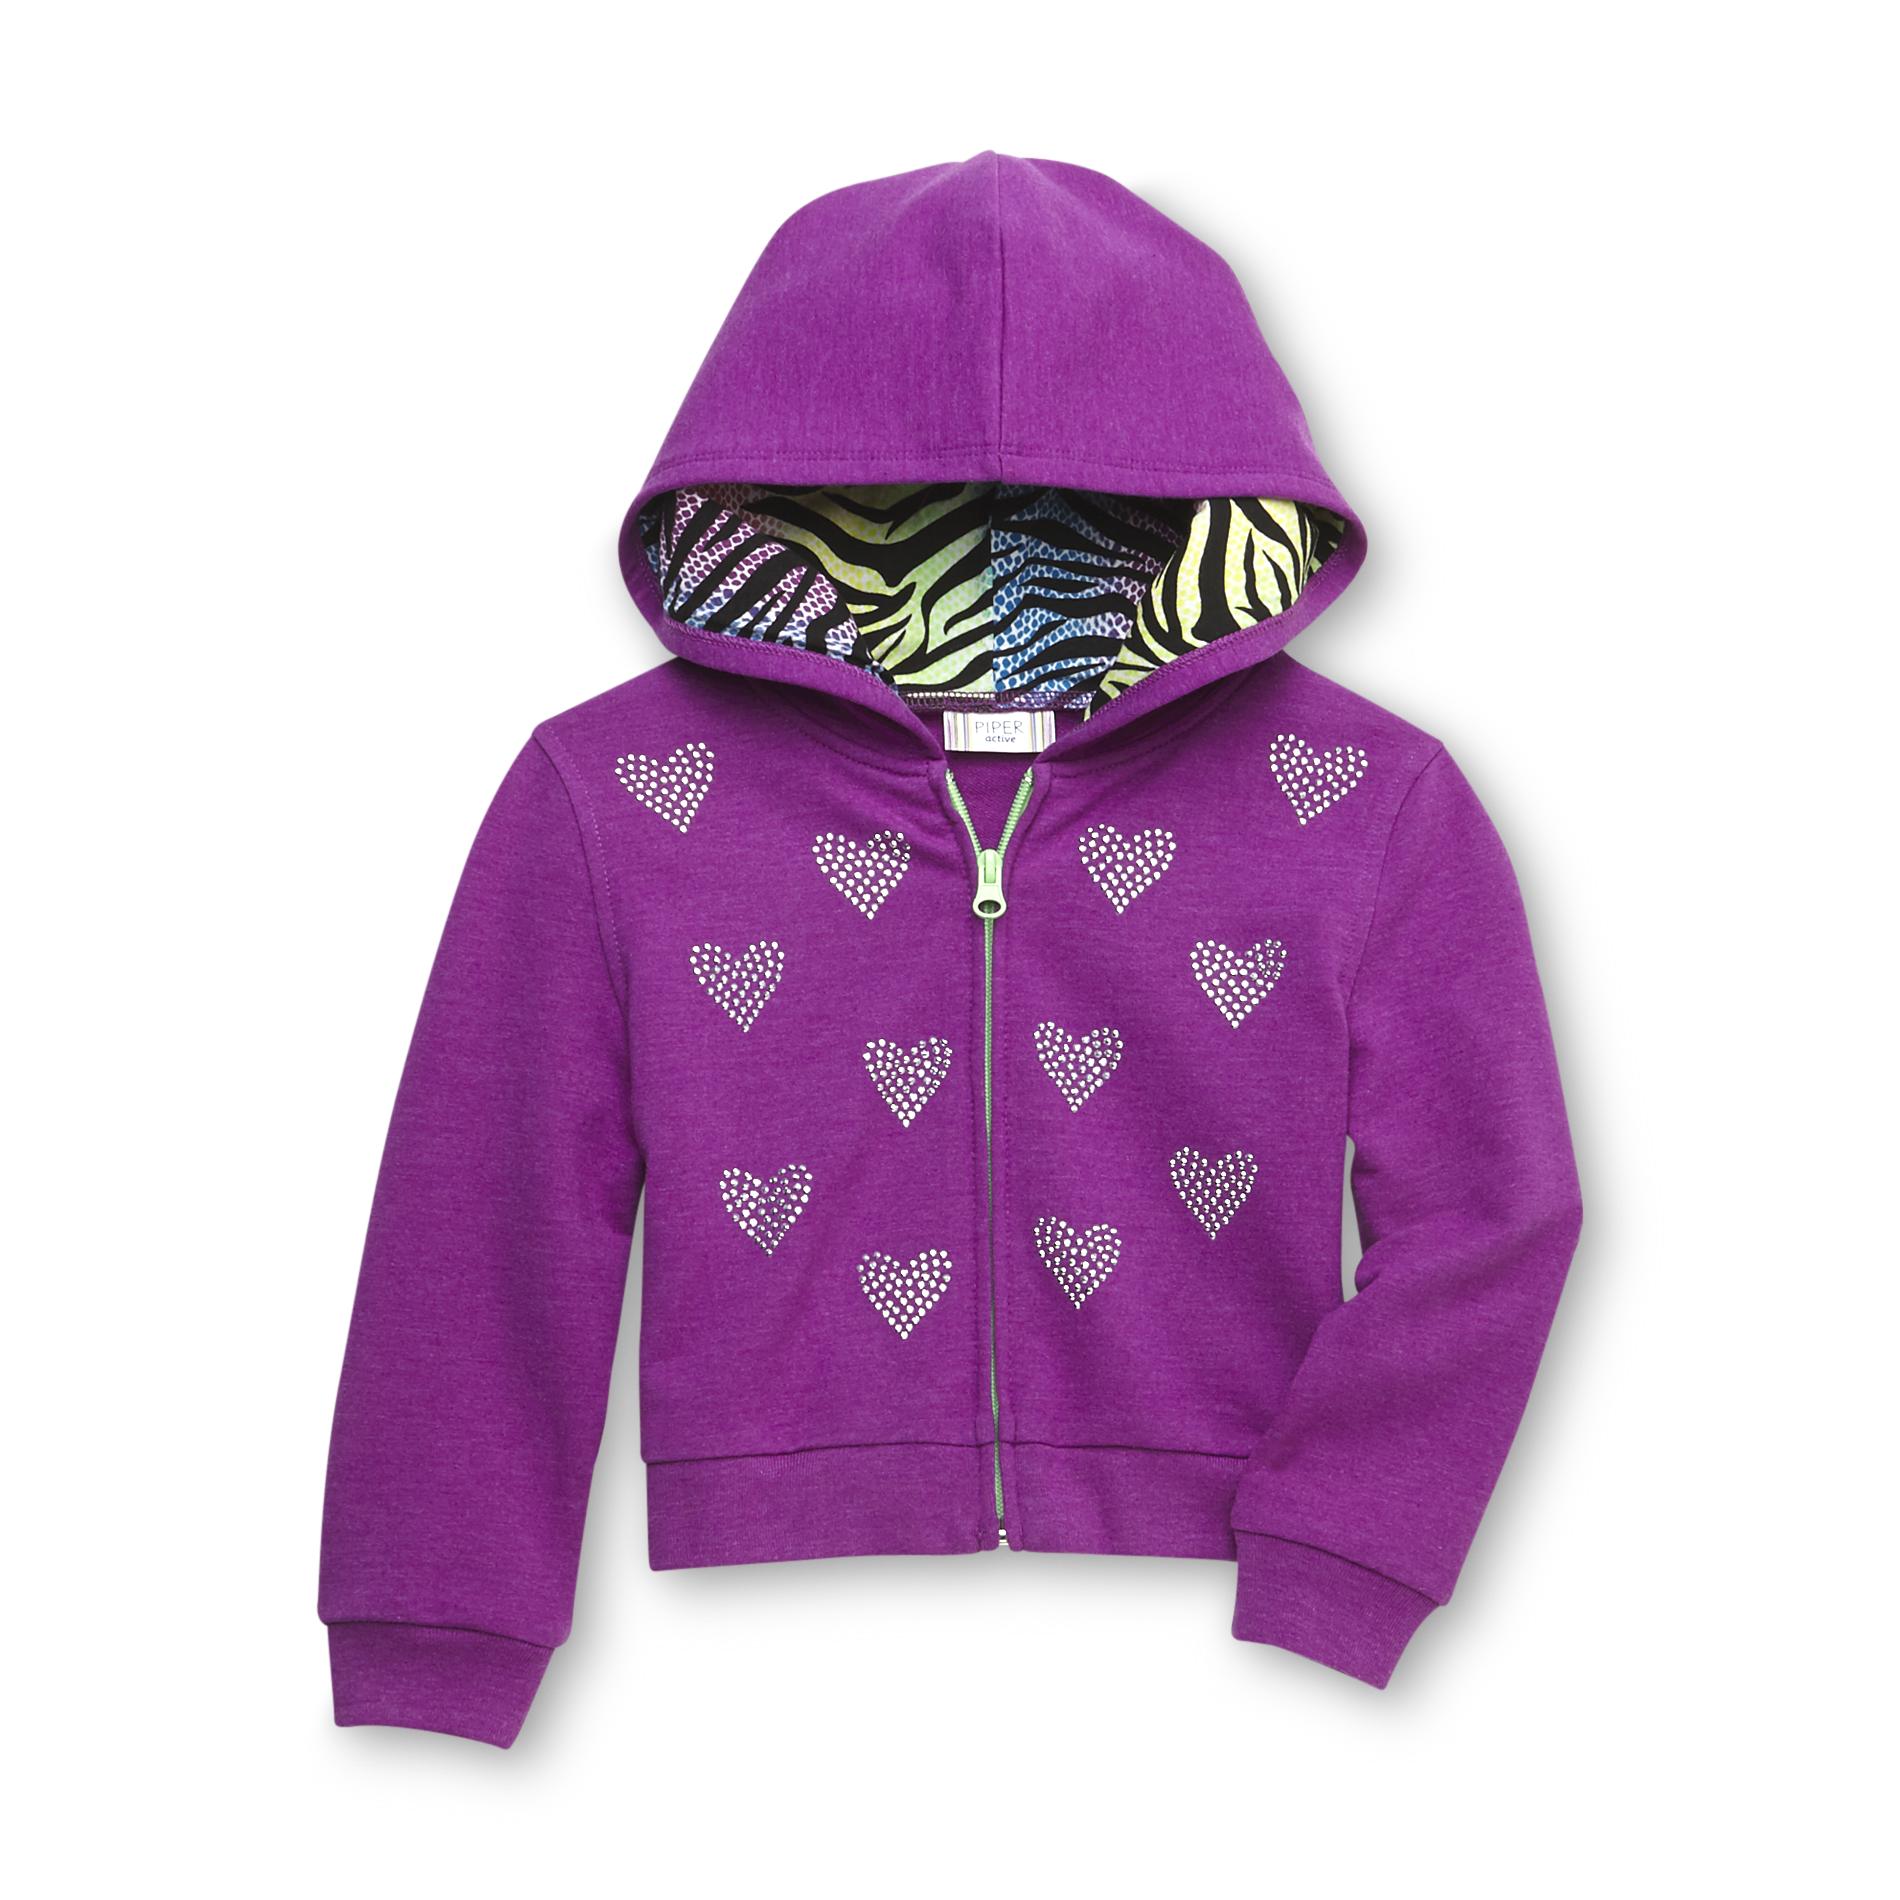 Piper Active Girl's Studded Graphic Hoodie Jacket - Zebra Print